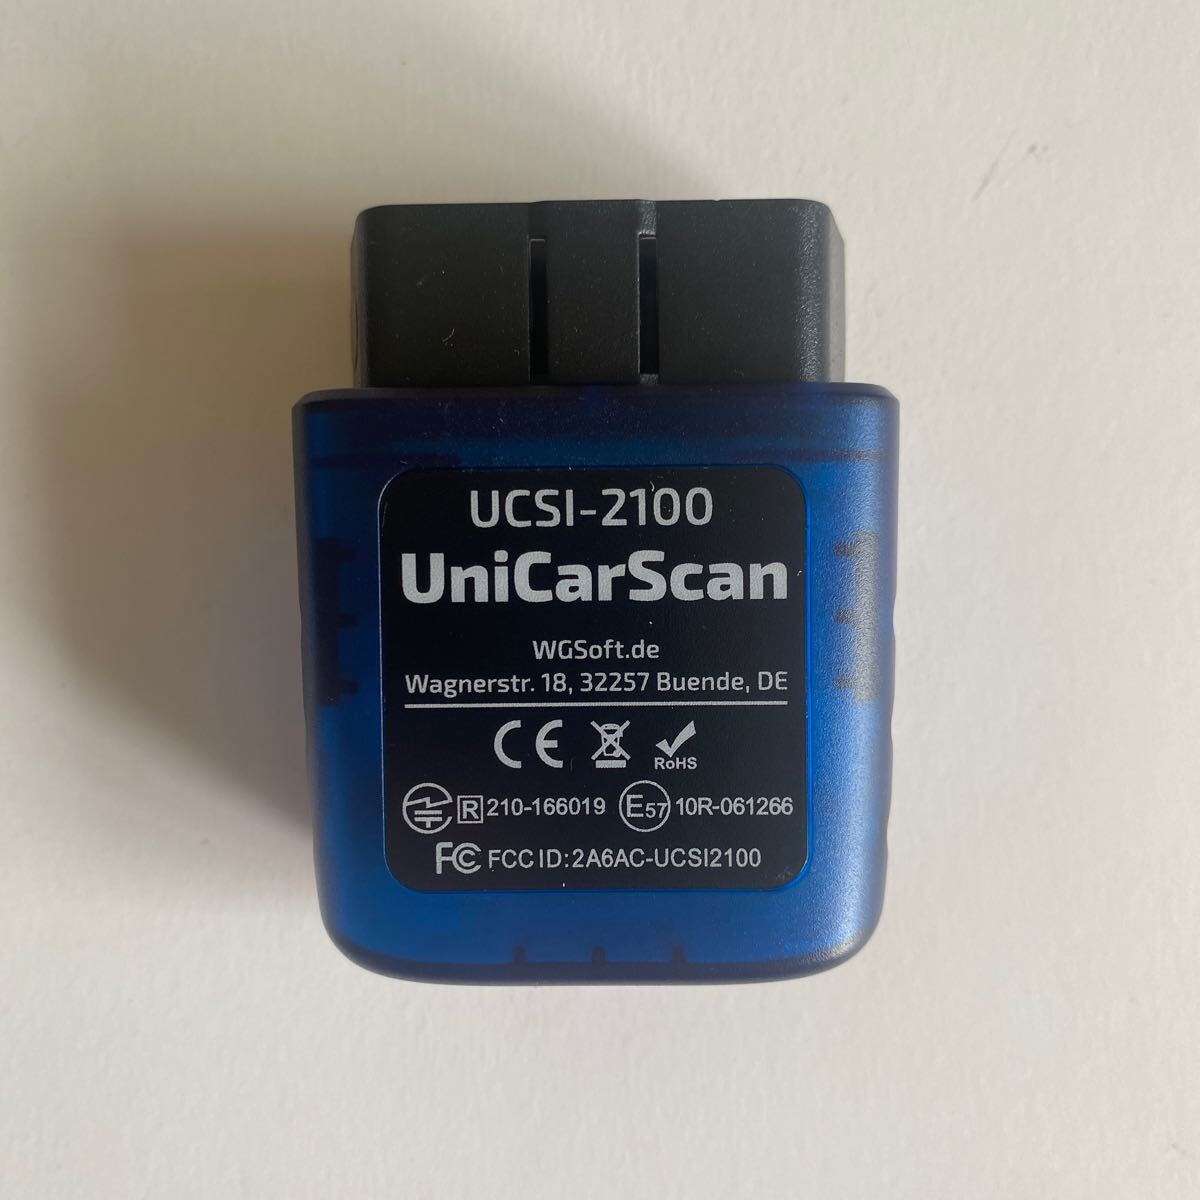 Unicarscan UCSI-2100 OBD2 Adapter For BMW Coding Bimmercode Motoscanの画像3